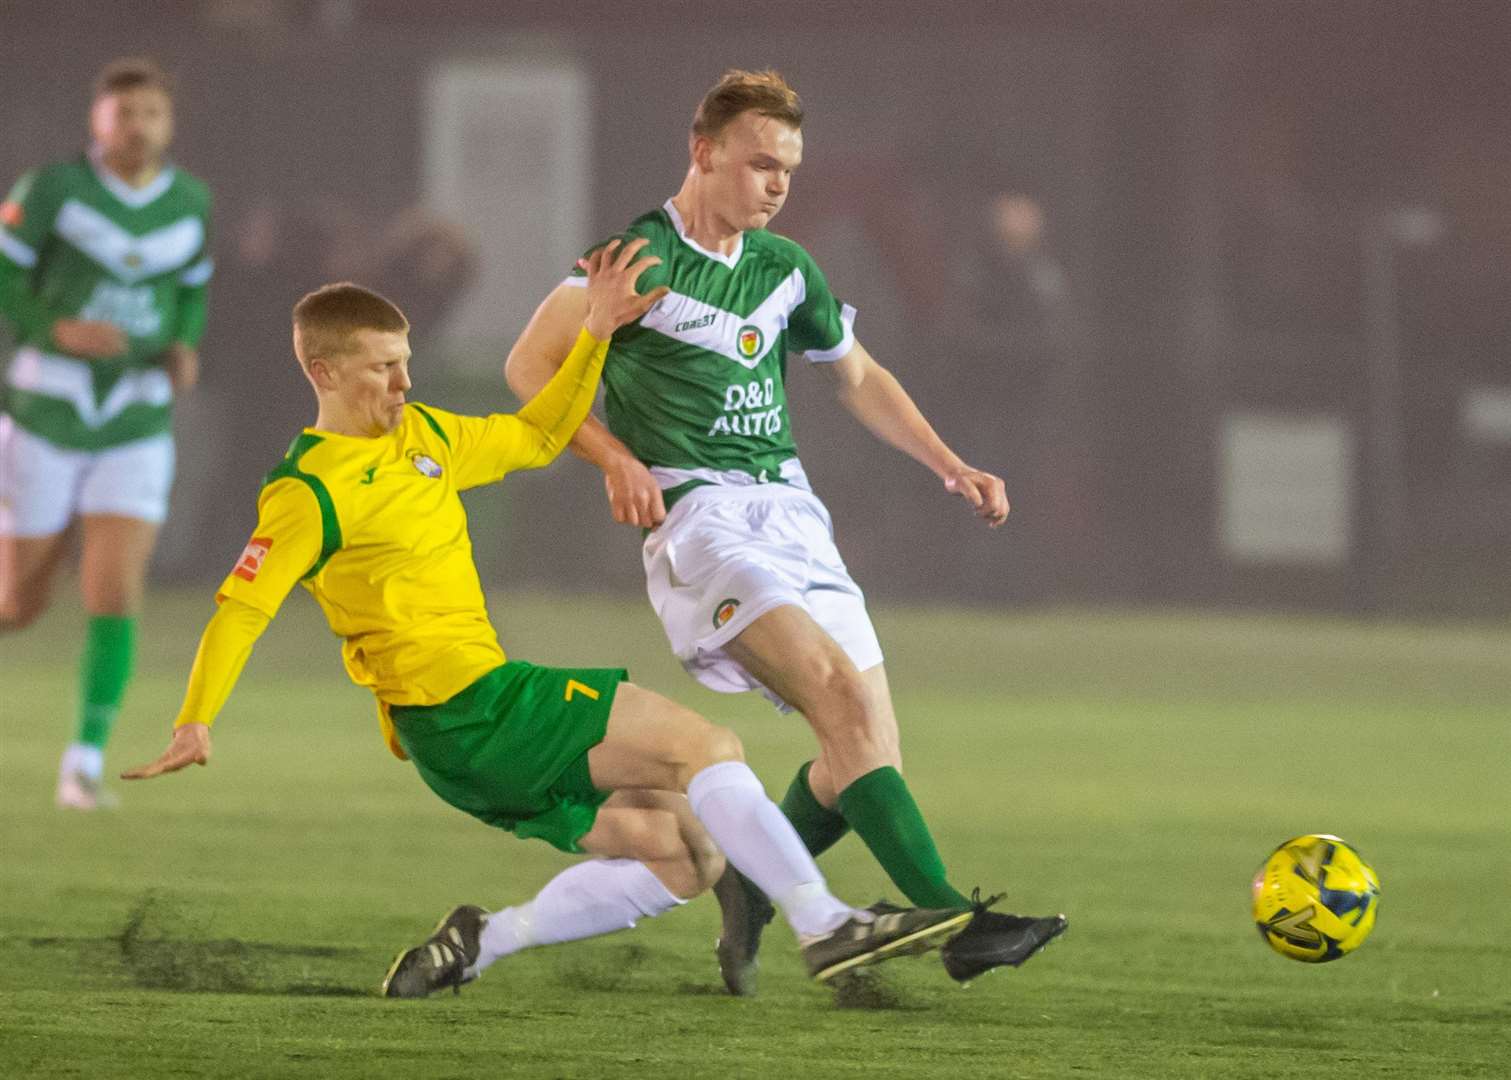 Cameron Brodie makes his Ashford debut on Tuesday night. Picture: Ian Scammell